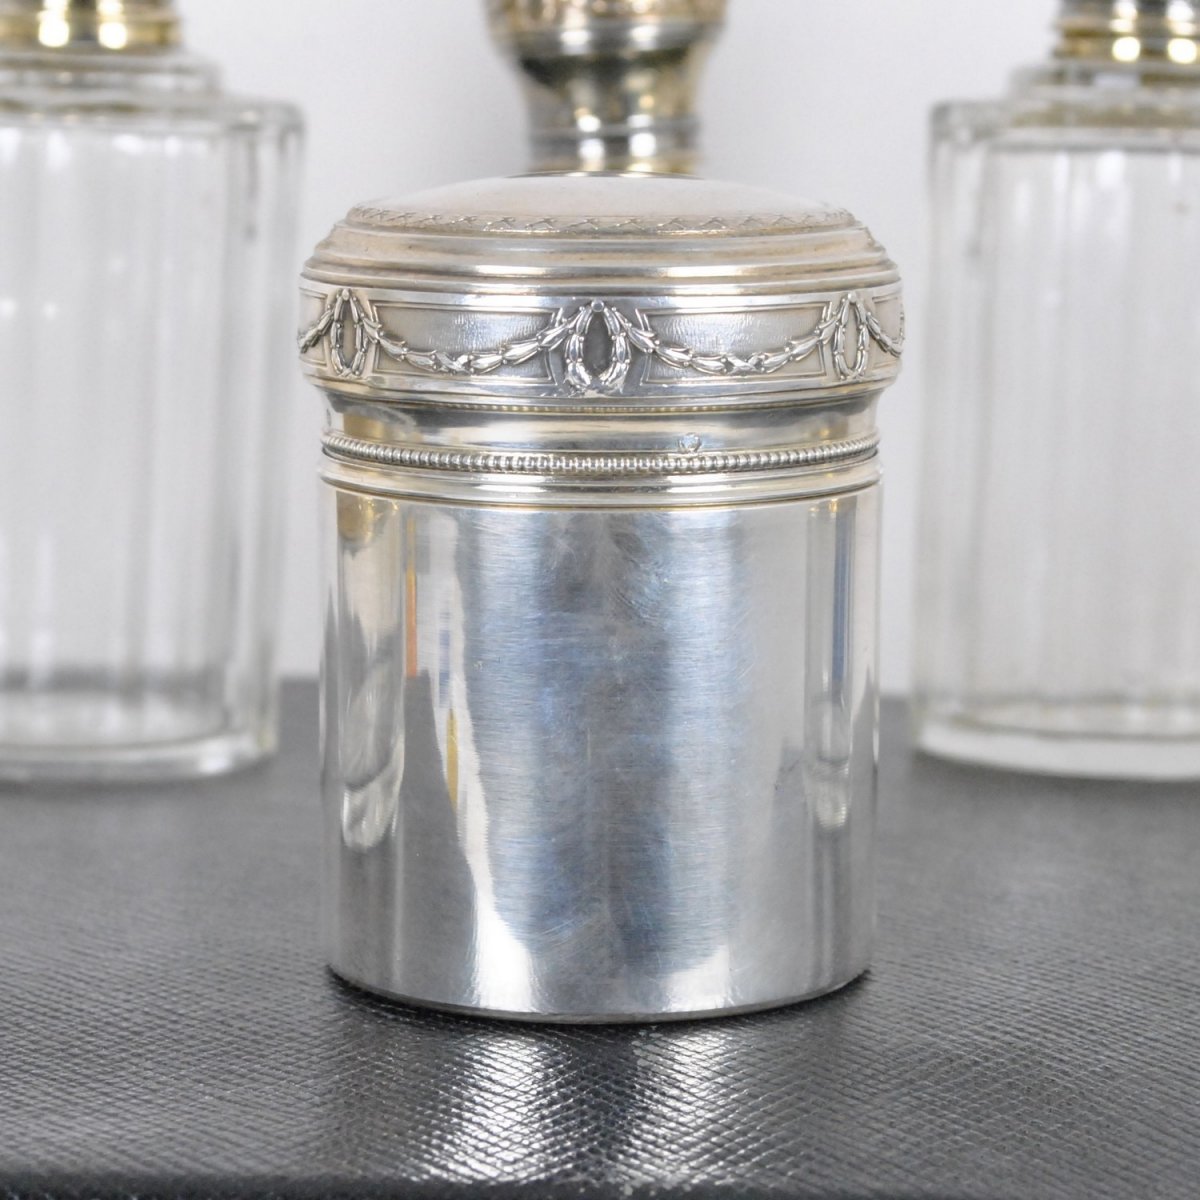 Toilet Case, Crystal And Silver, Monogrammed, 19th Century-photo-7